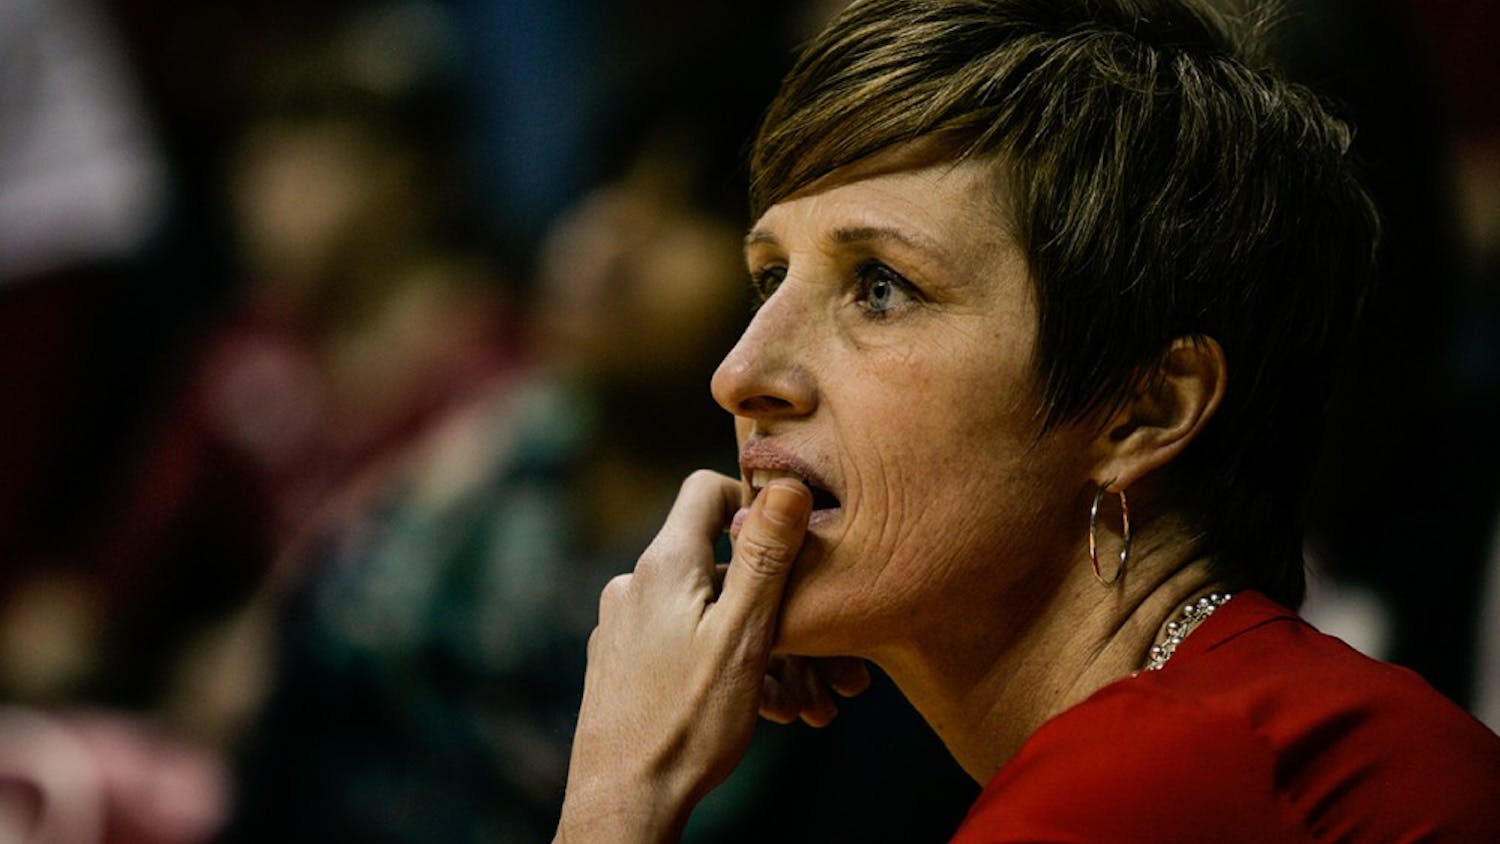 Head coach Teri Moren takes a knee at the edge of the court during the fourth quarter of play. The Hoosiers held on late to beat the Iowa Hawkeyes 79-74 February 4, 2016.